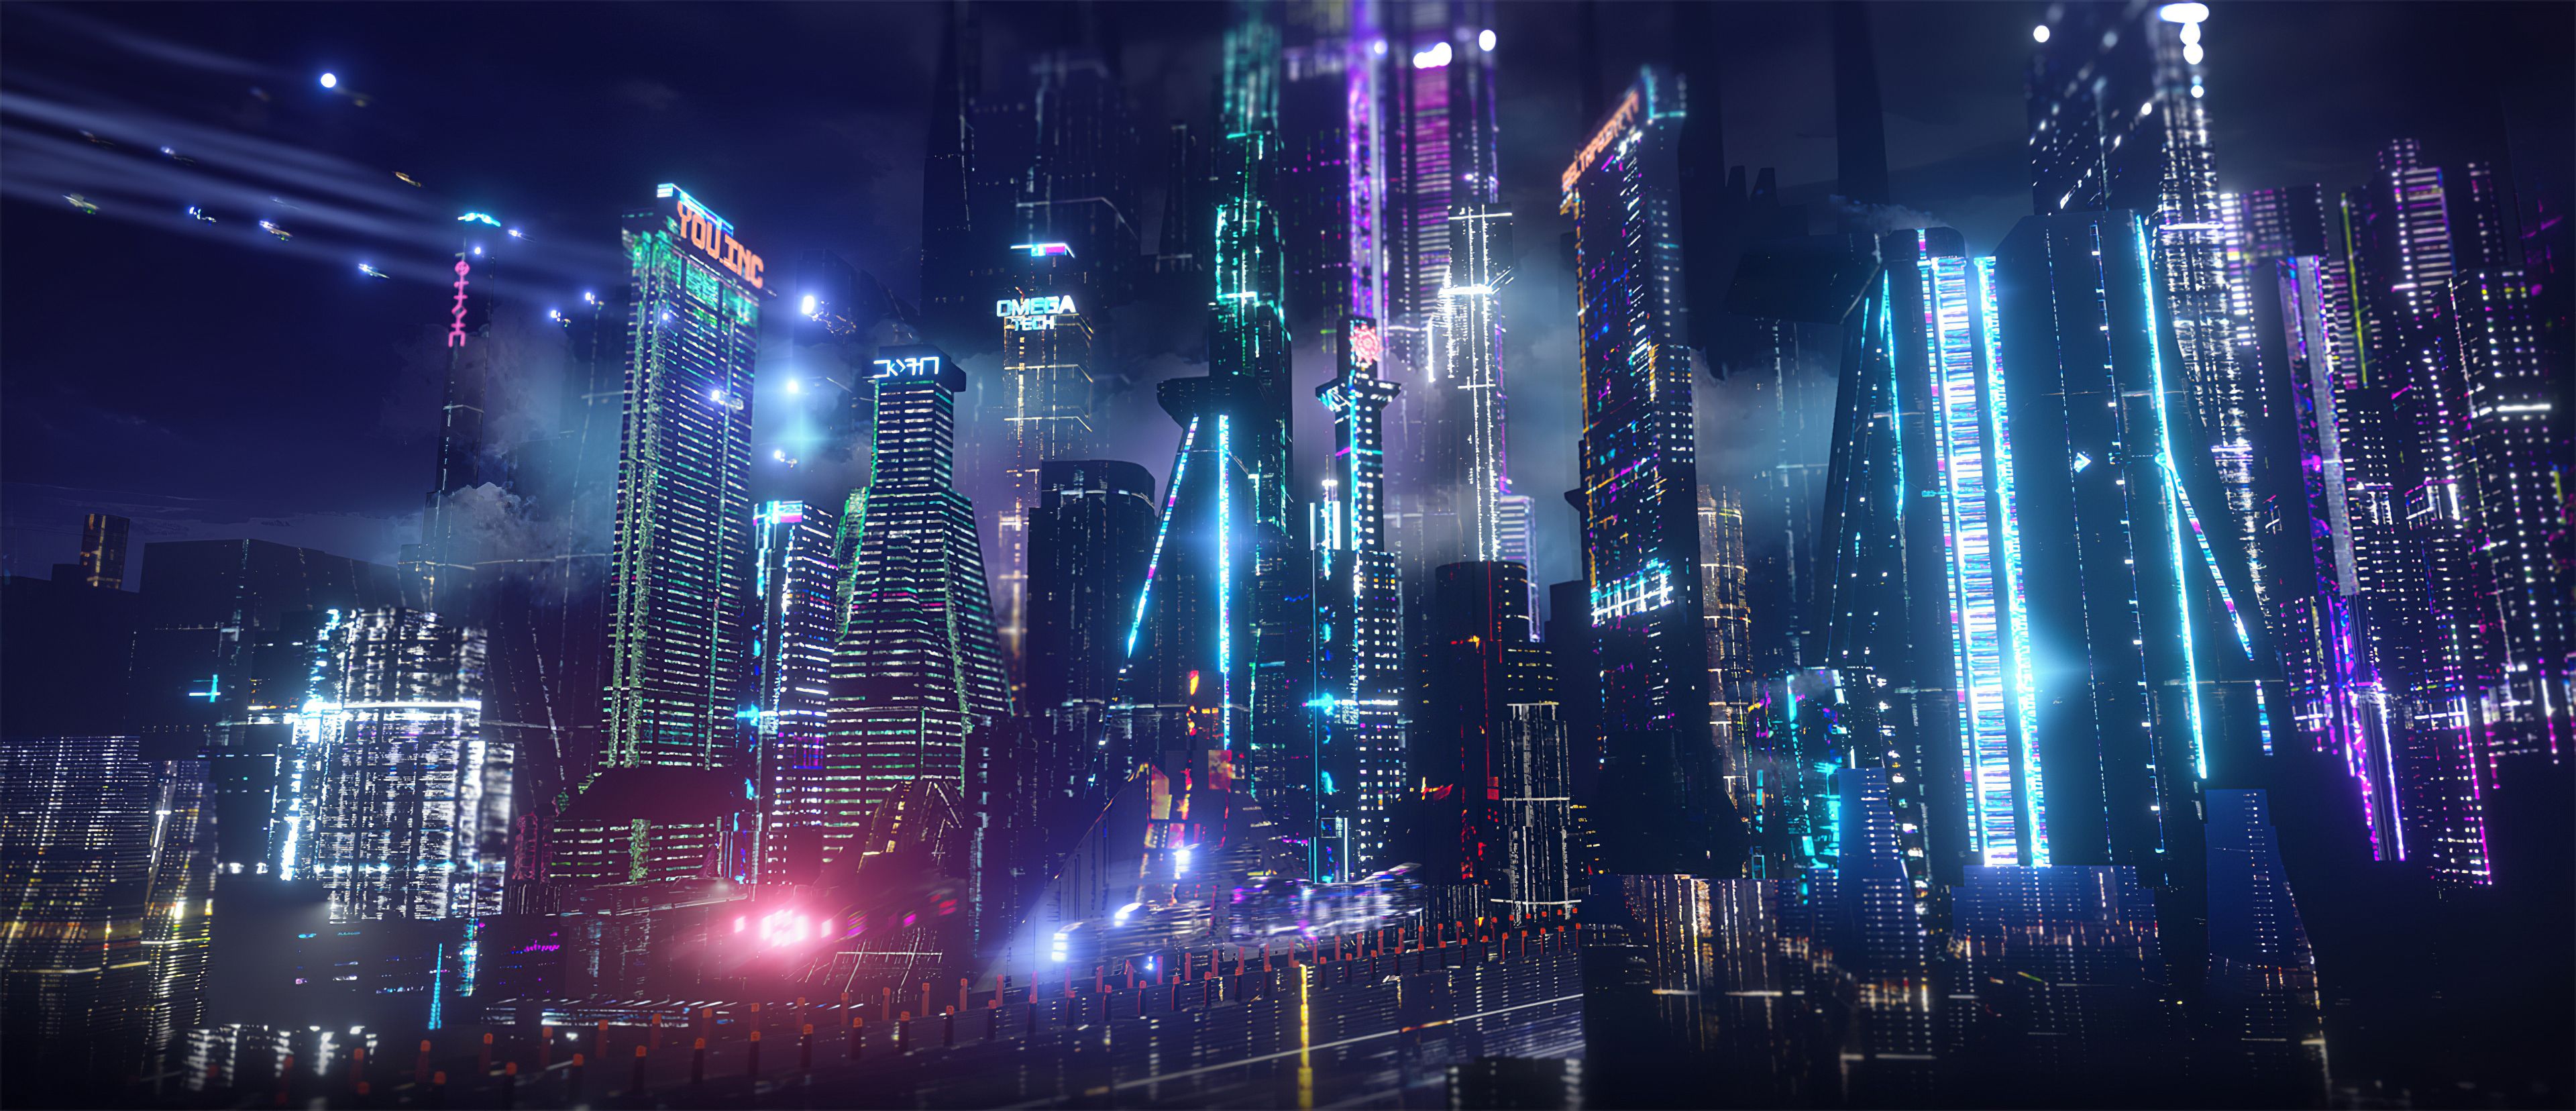 Neon City Lights 4k, HD Artist, 4k Wallpaper, Image, Background, Photo and Picture